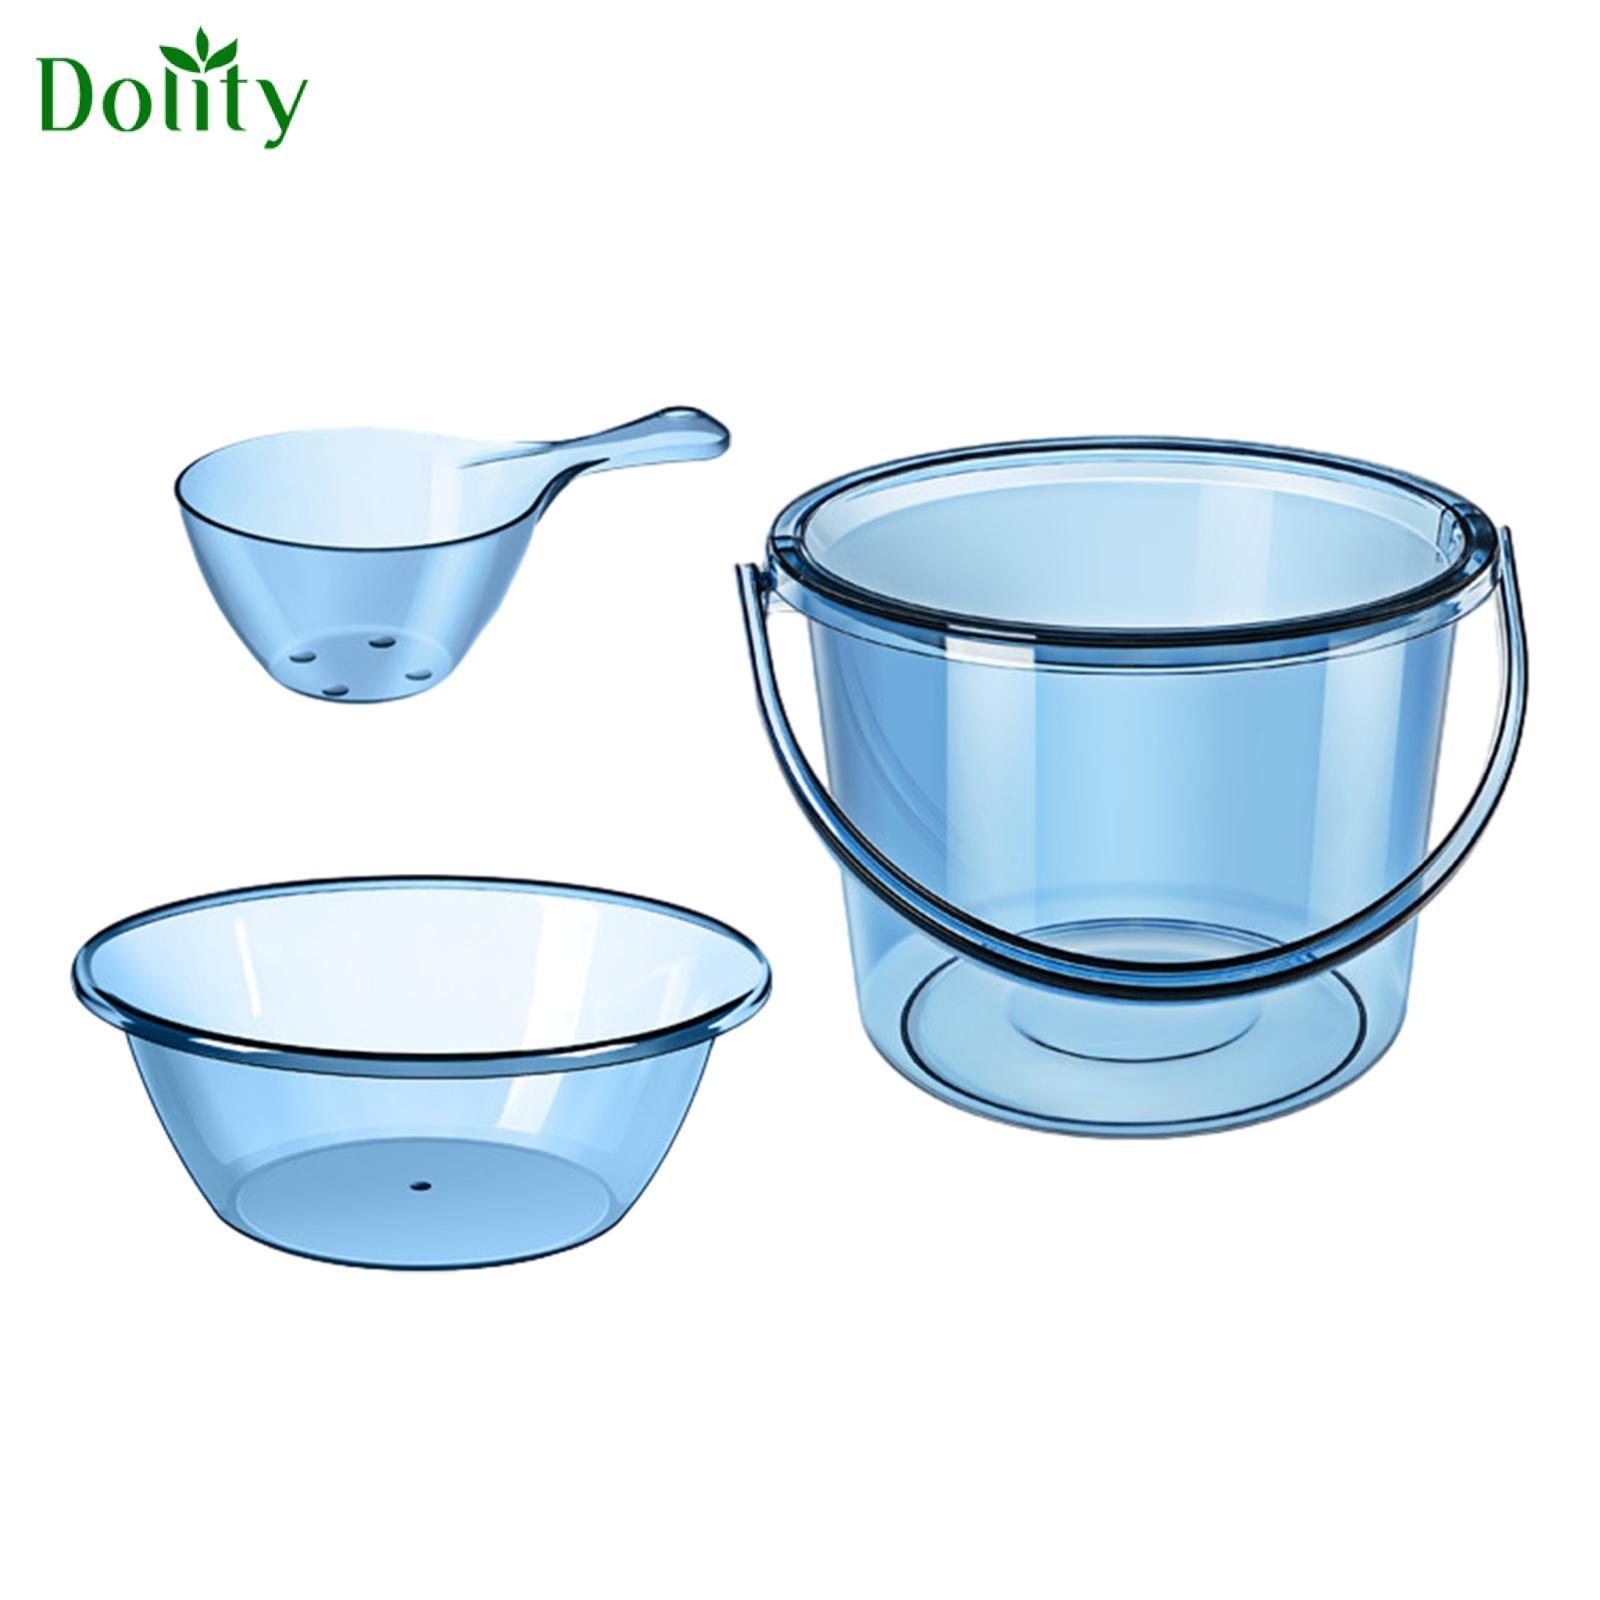 Dolity Water Bucket Set with Basin Spoon Fishing Bucket Portable Laundry